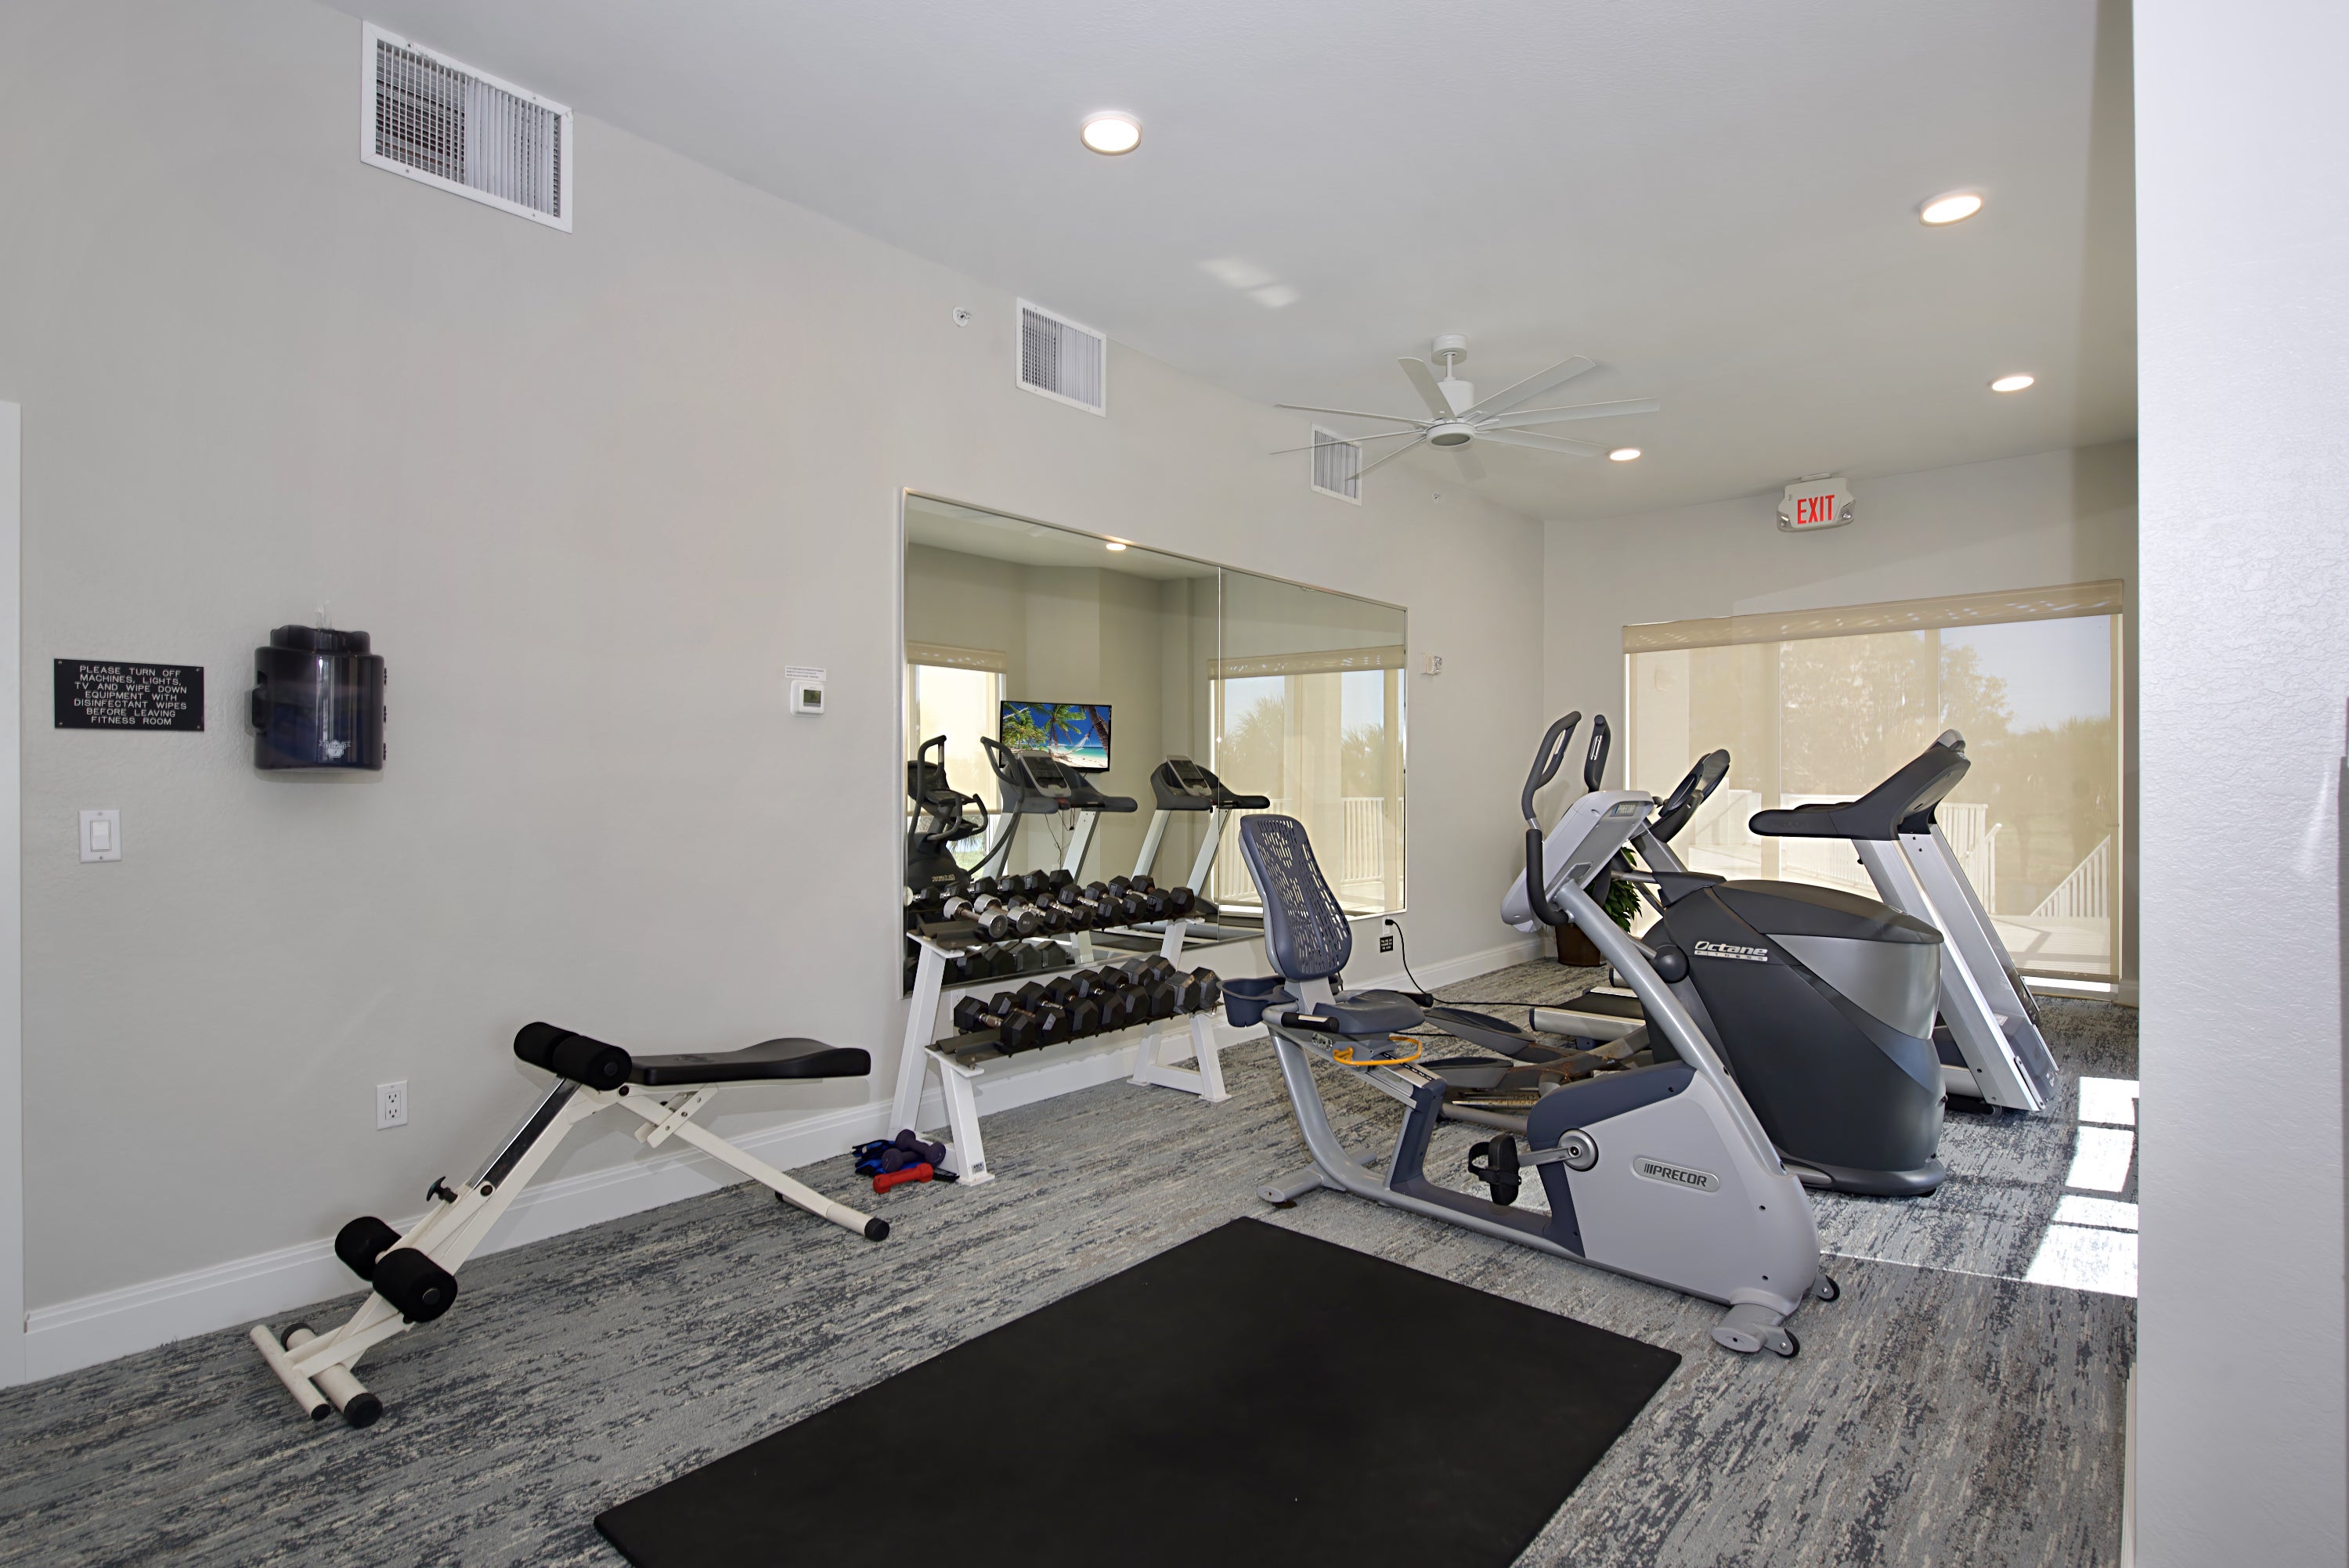 Fitness Room in building